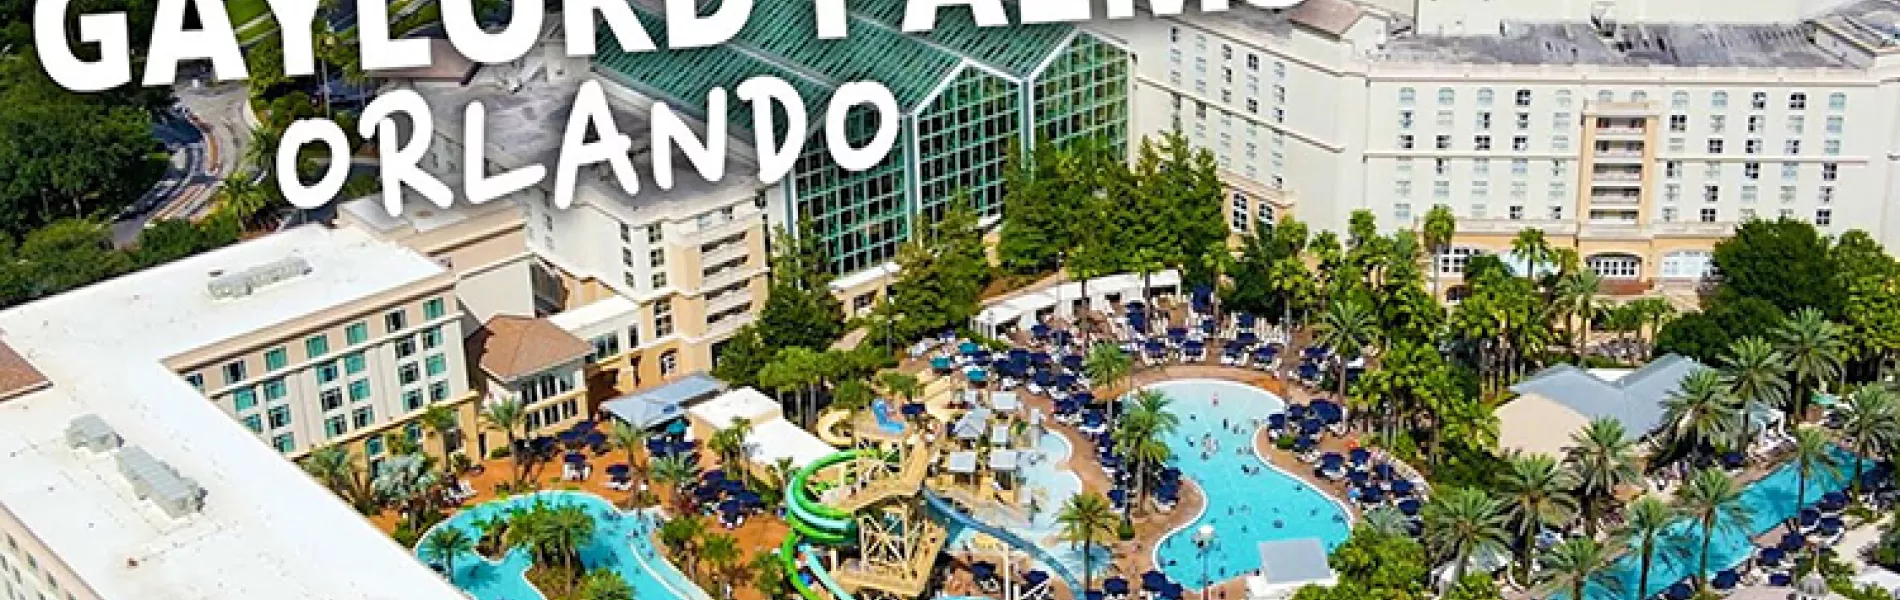 Gaylord Palms - 2022 ISPE Annual Meeting & Expo location